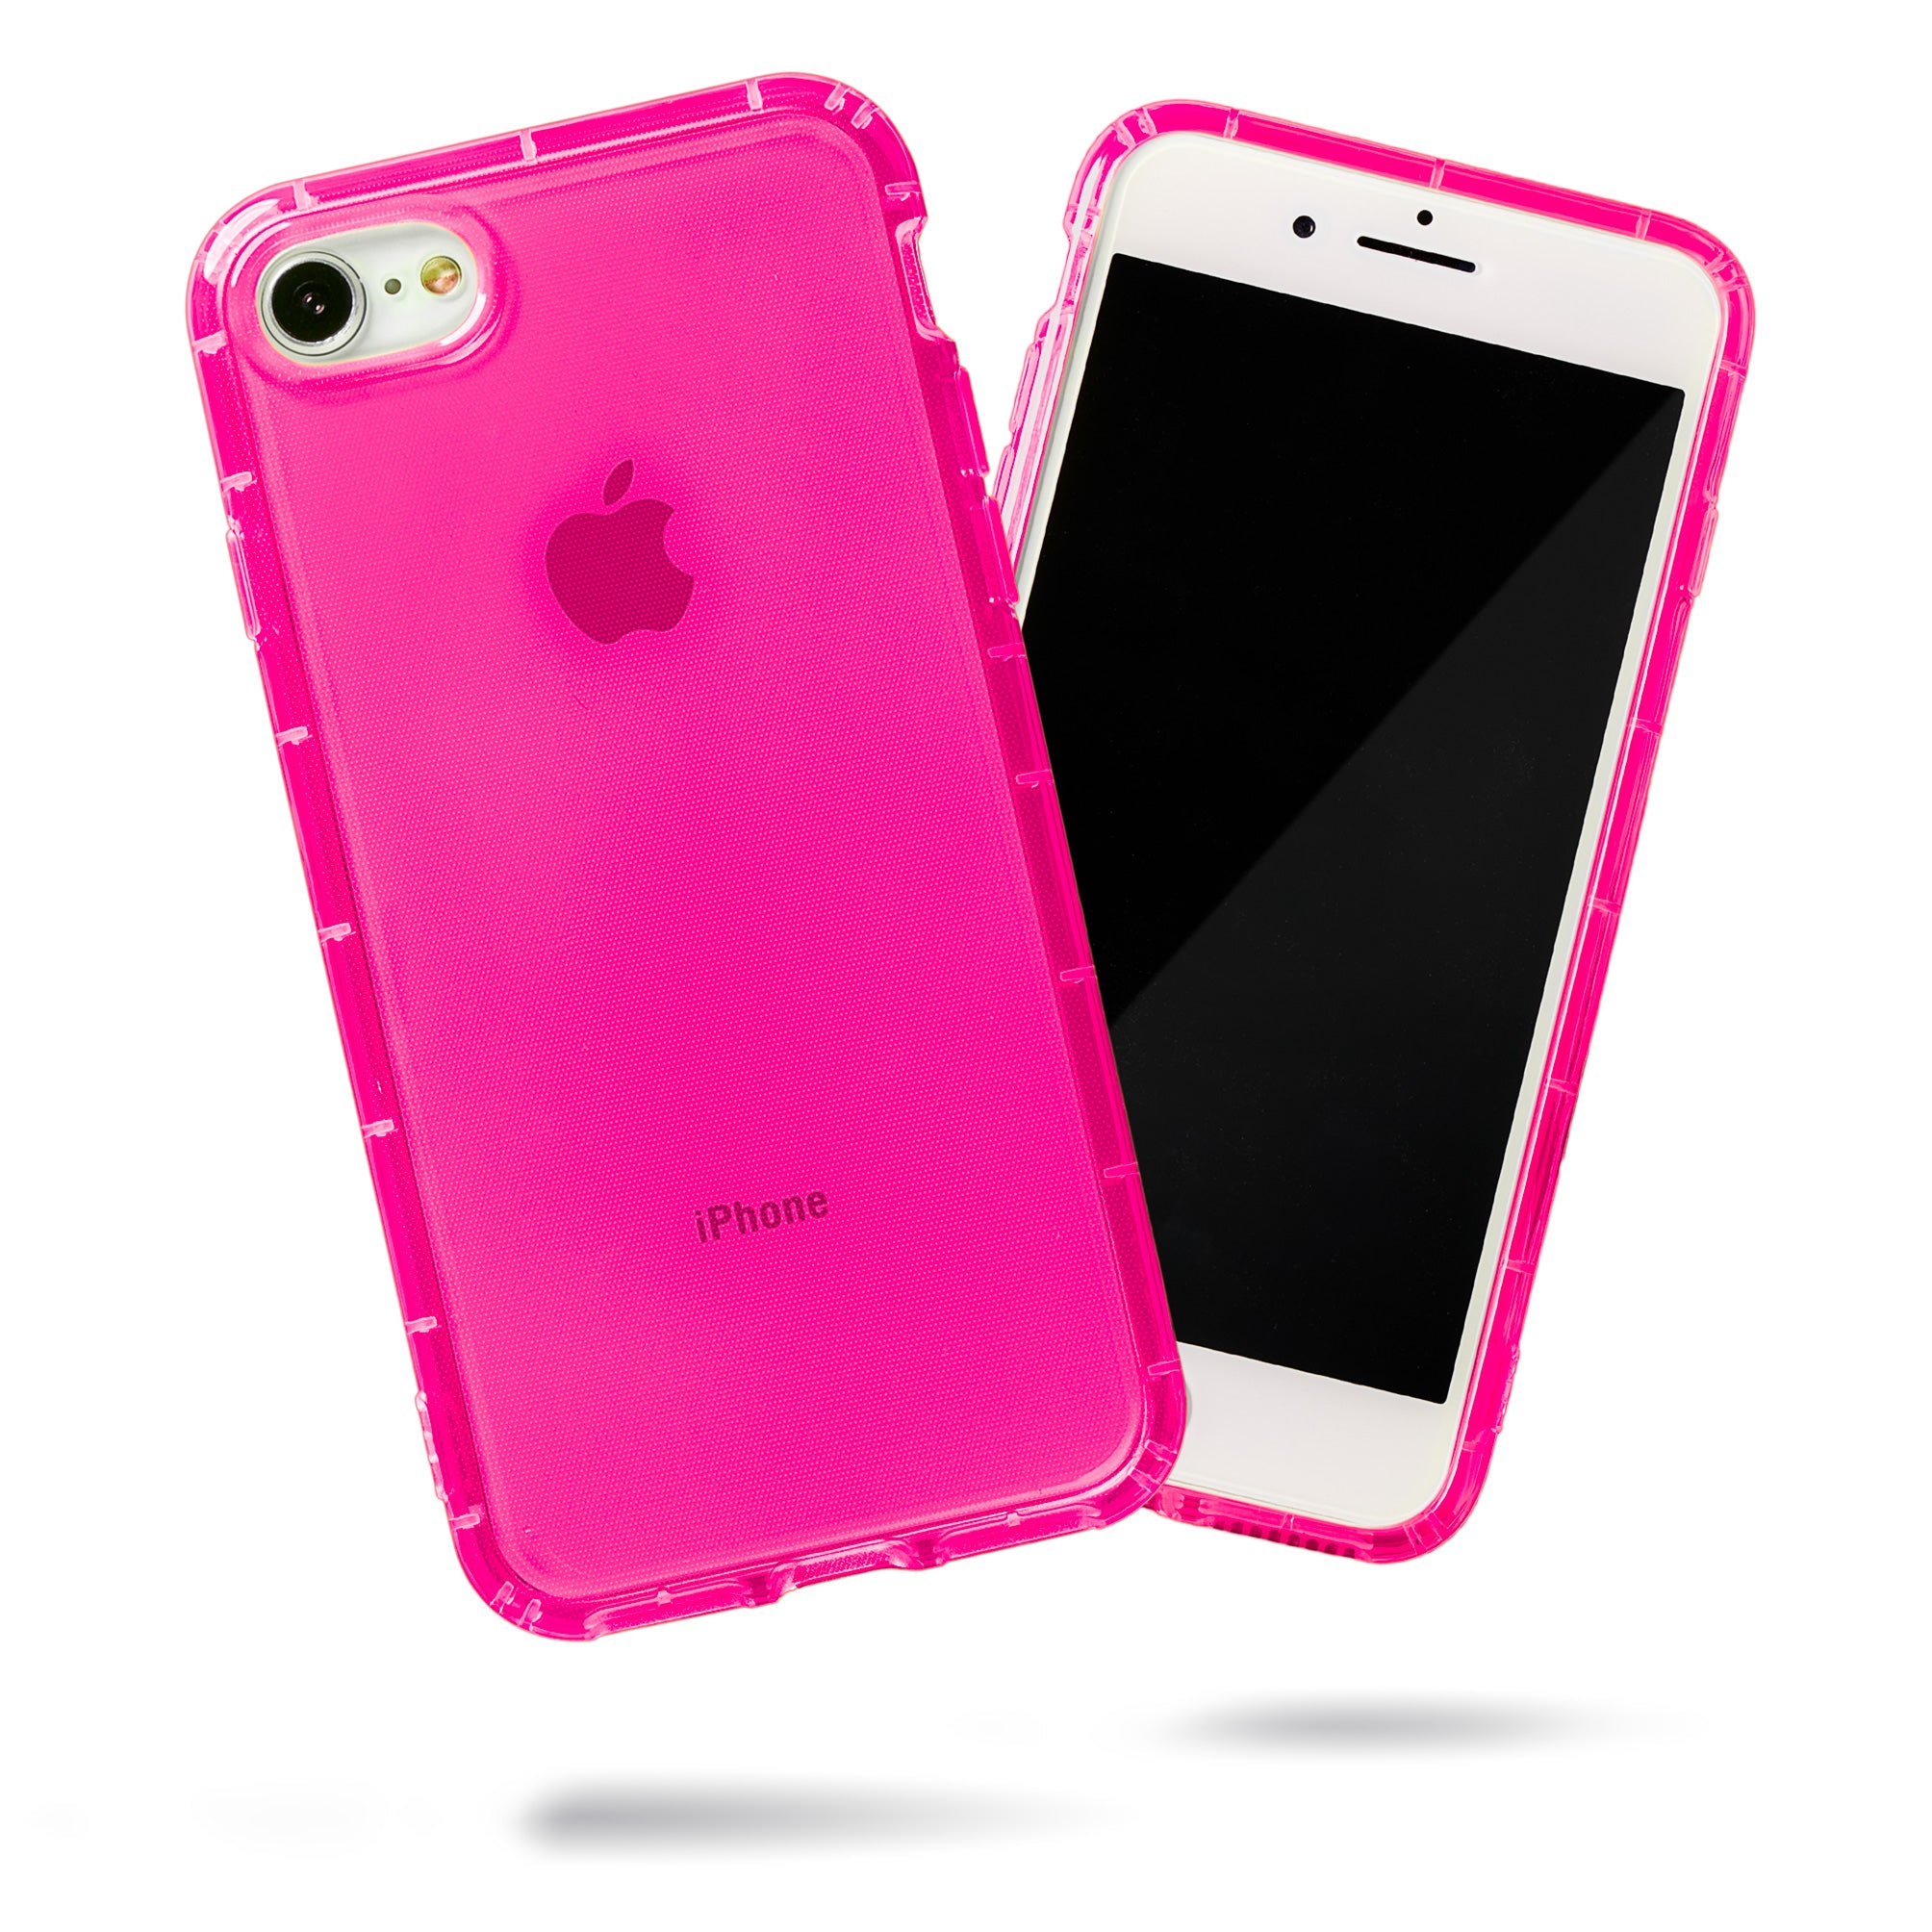 Highlighter Case for iPhone SE, iPhone 8 & iPhone 7 - Eye-Catching Hot Pink